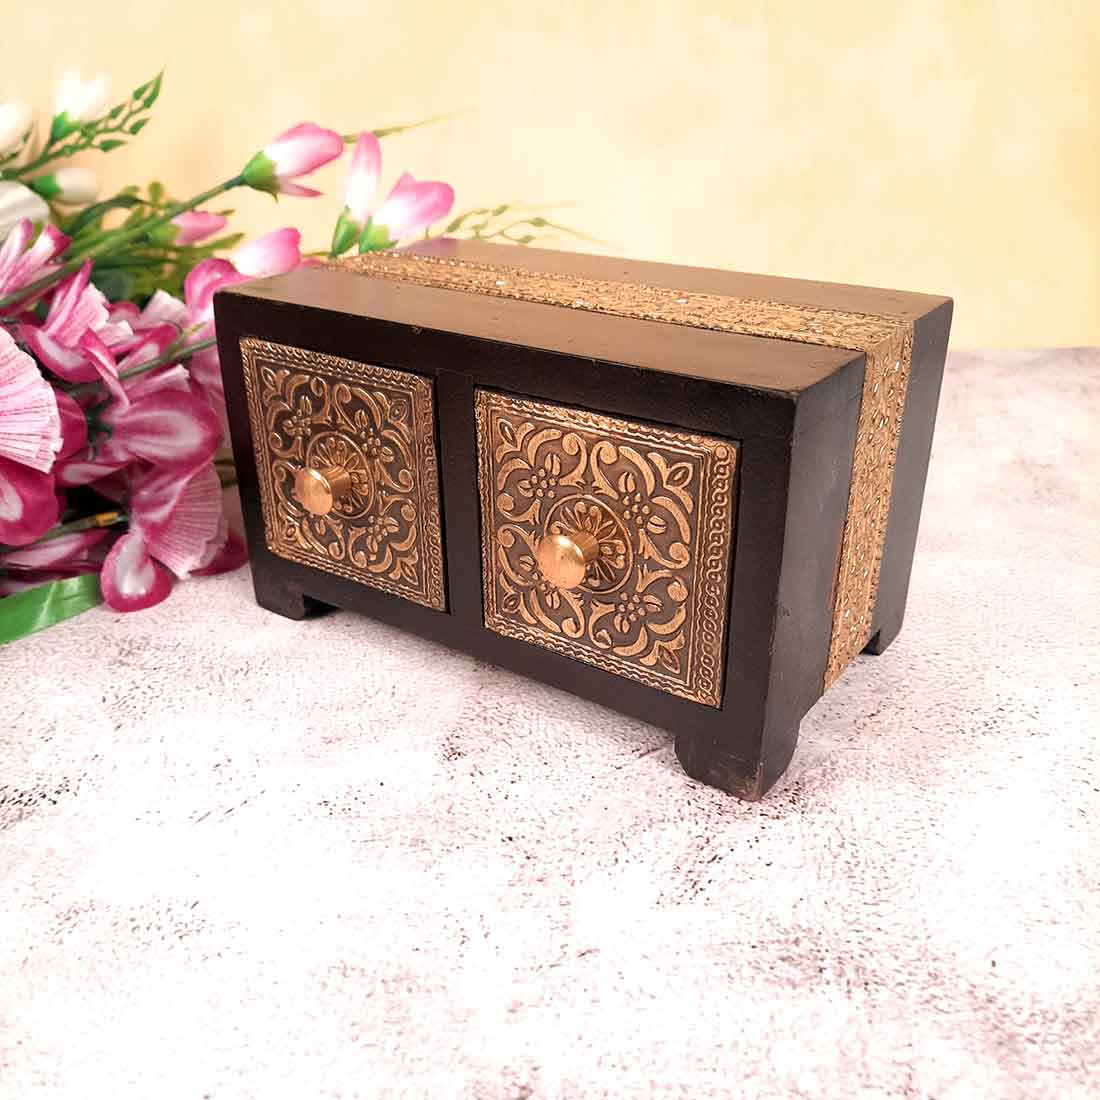 Jewelry Box Antique | Brass Jewellery Box - For Wedding & Anniversary Gift | Organizer for Rings, Necklace, Earrings, Makeup, Dressing Table Decor & Gifts - 7 Inch